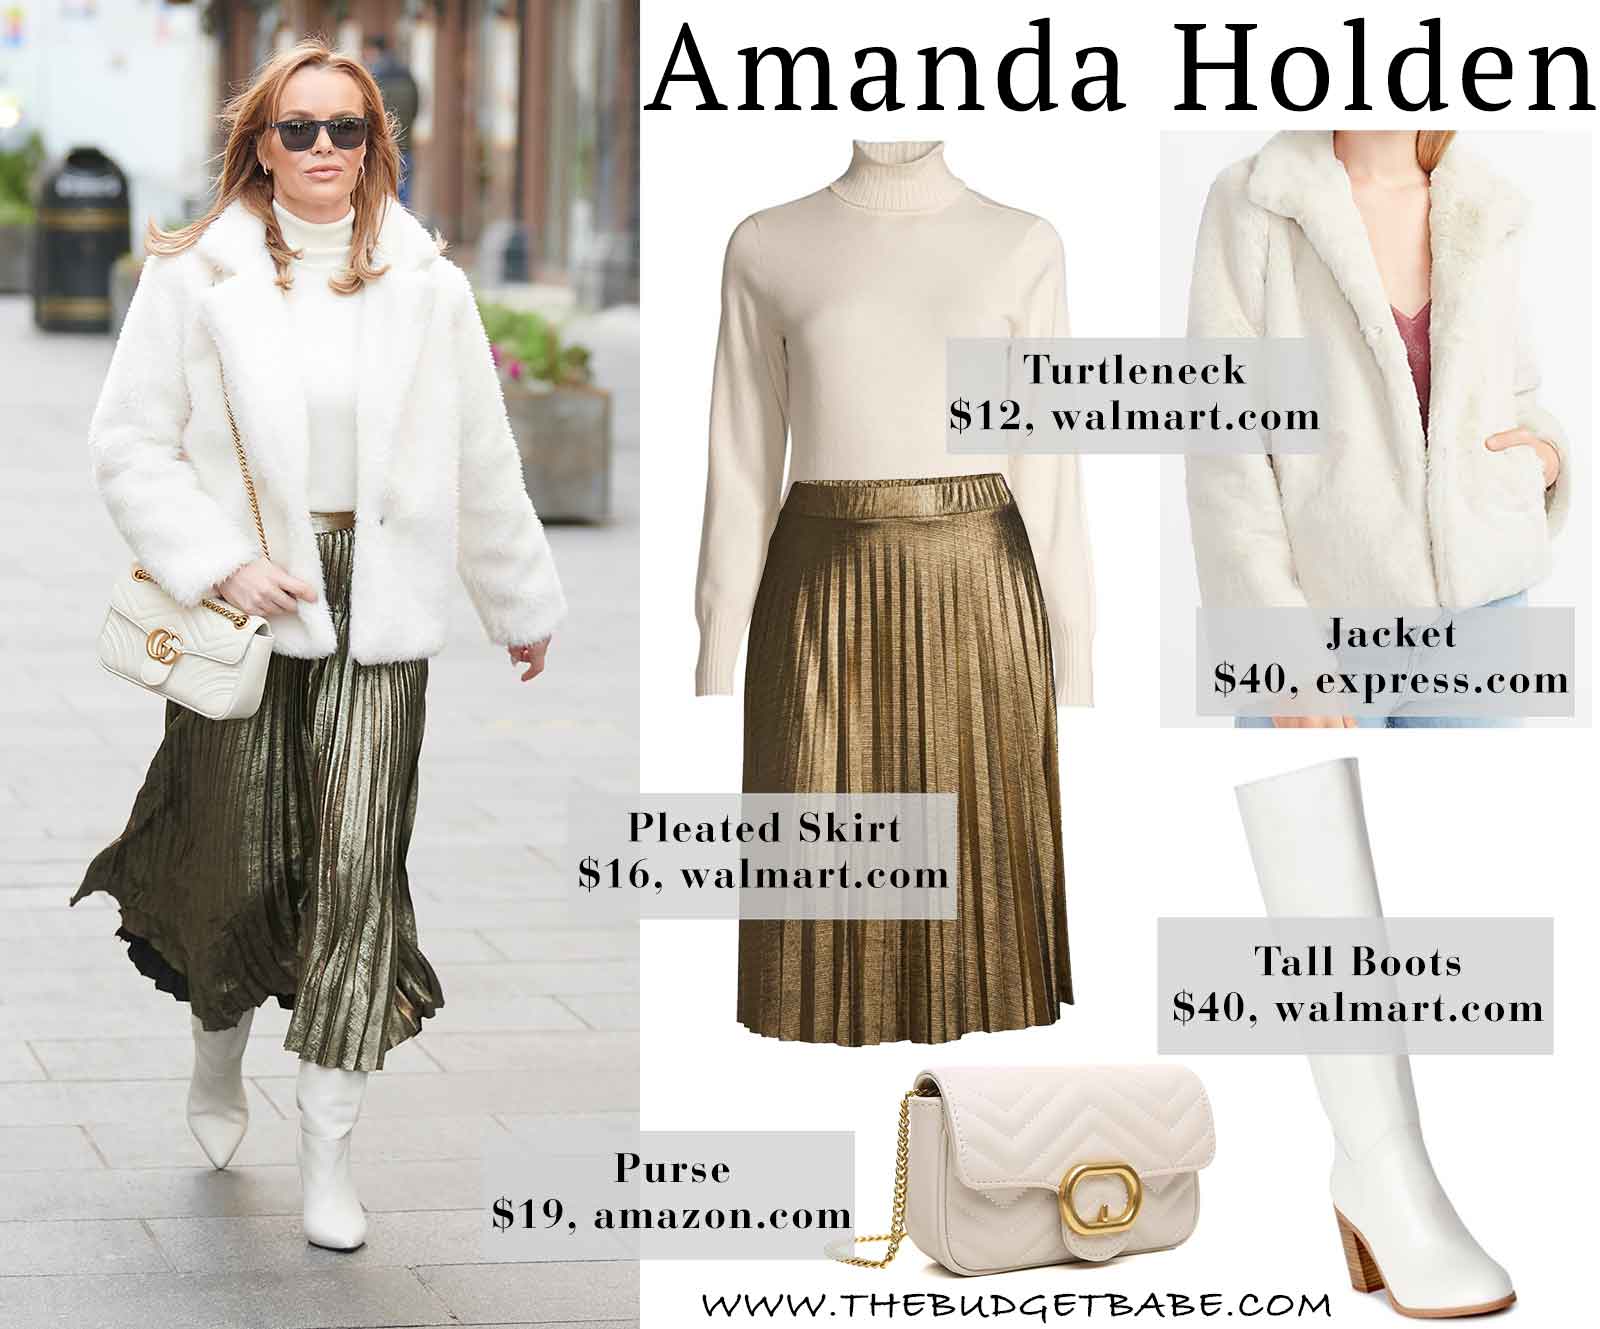 Amanda Holden's Gold Pleated Skirt and White Fur Jacket Look for Less | Holiday Outfit Idea